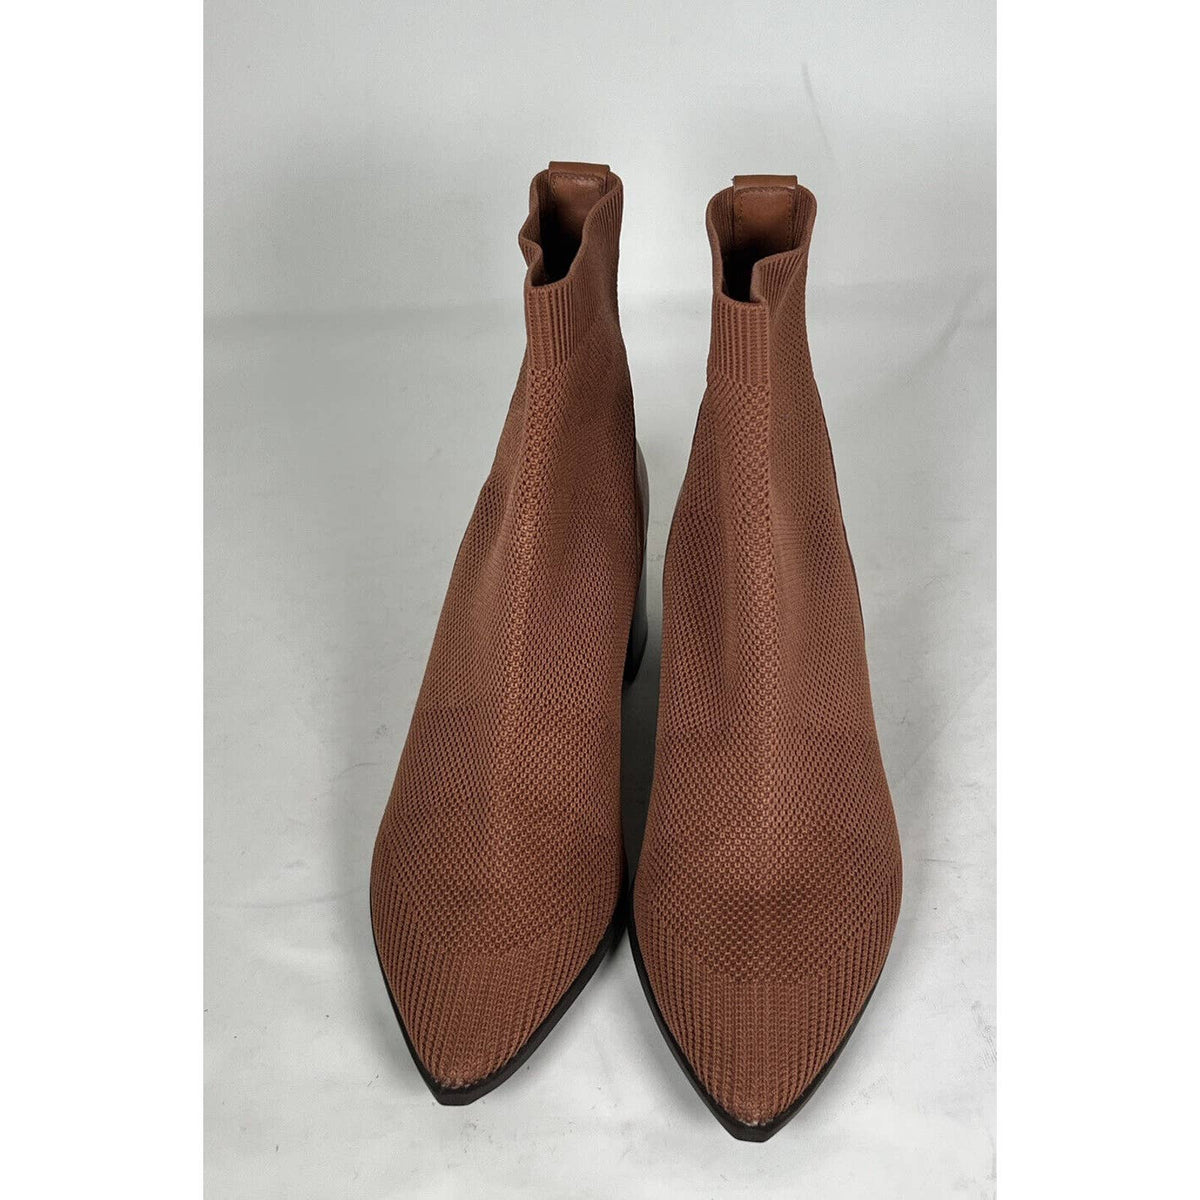 Everlane The Glove Boot Toffee Sz. 8.5